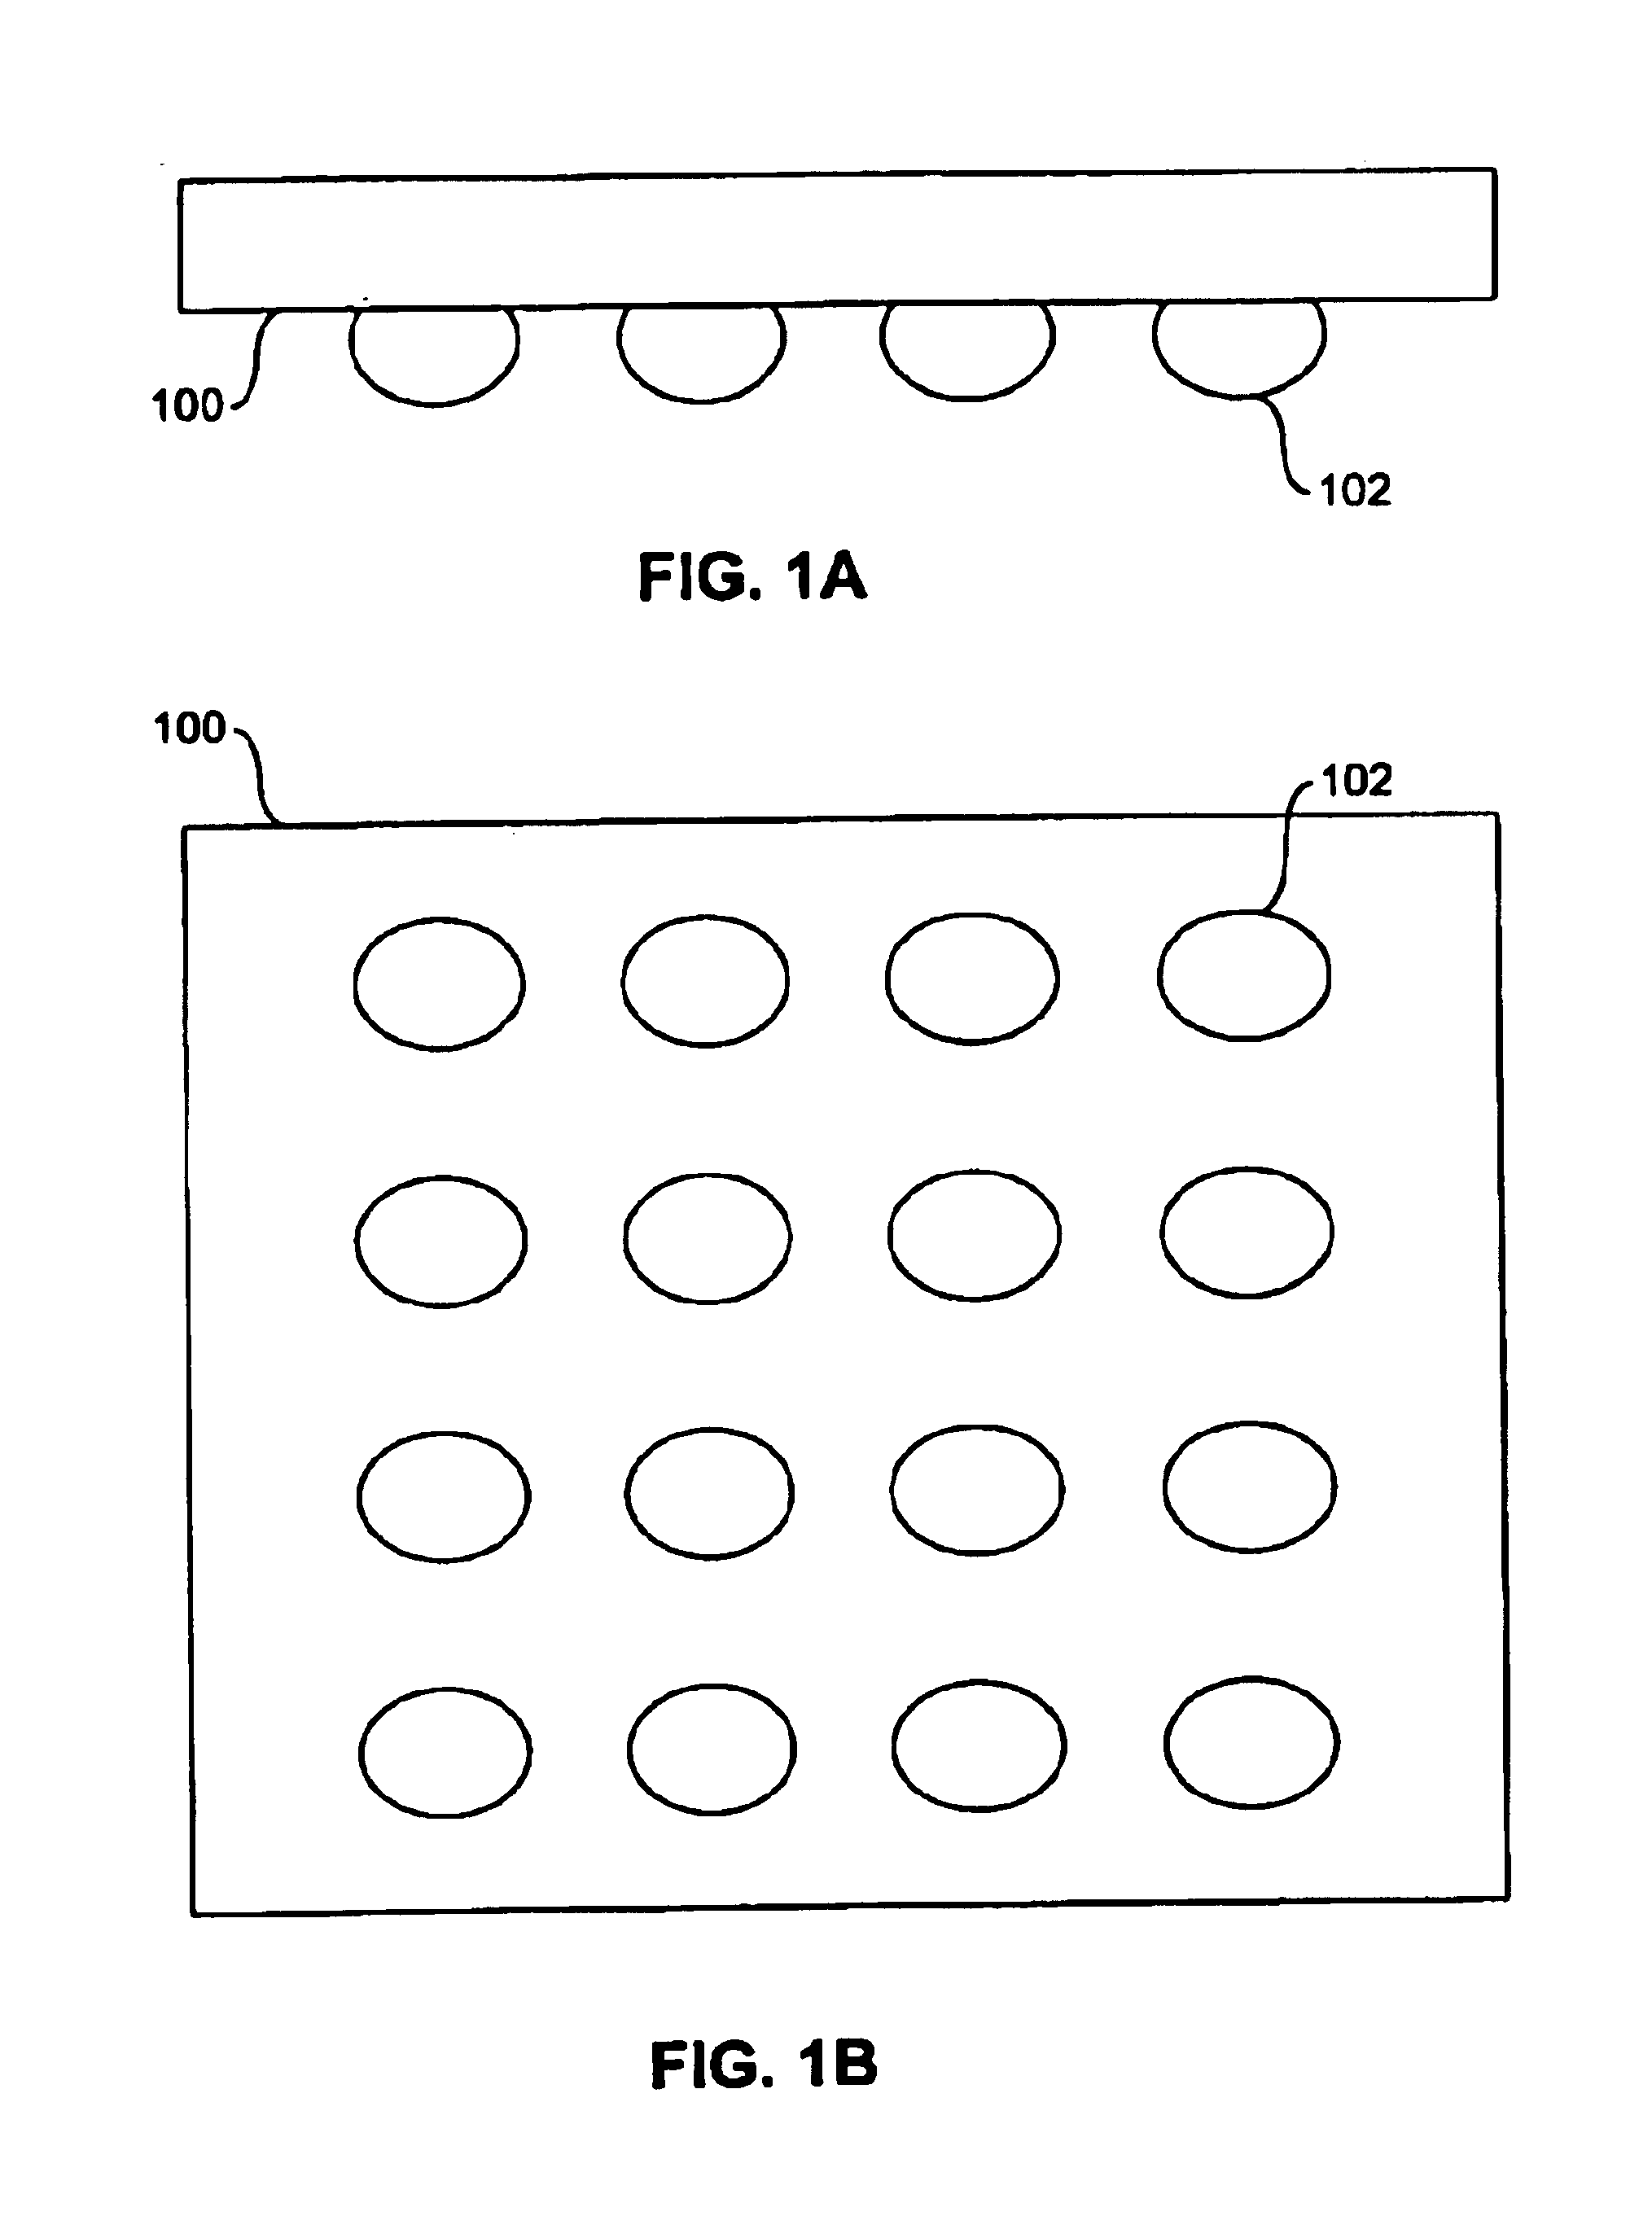 Method for making a socket to perform testing on integrated circuits